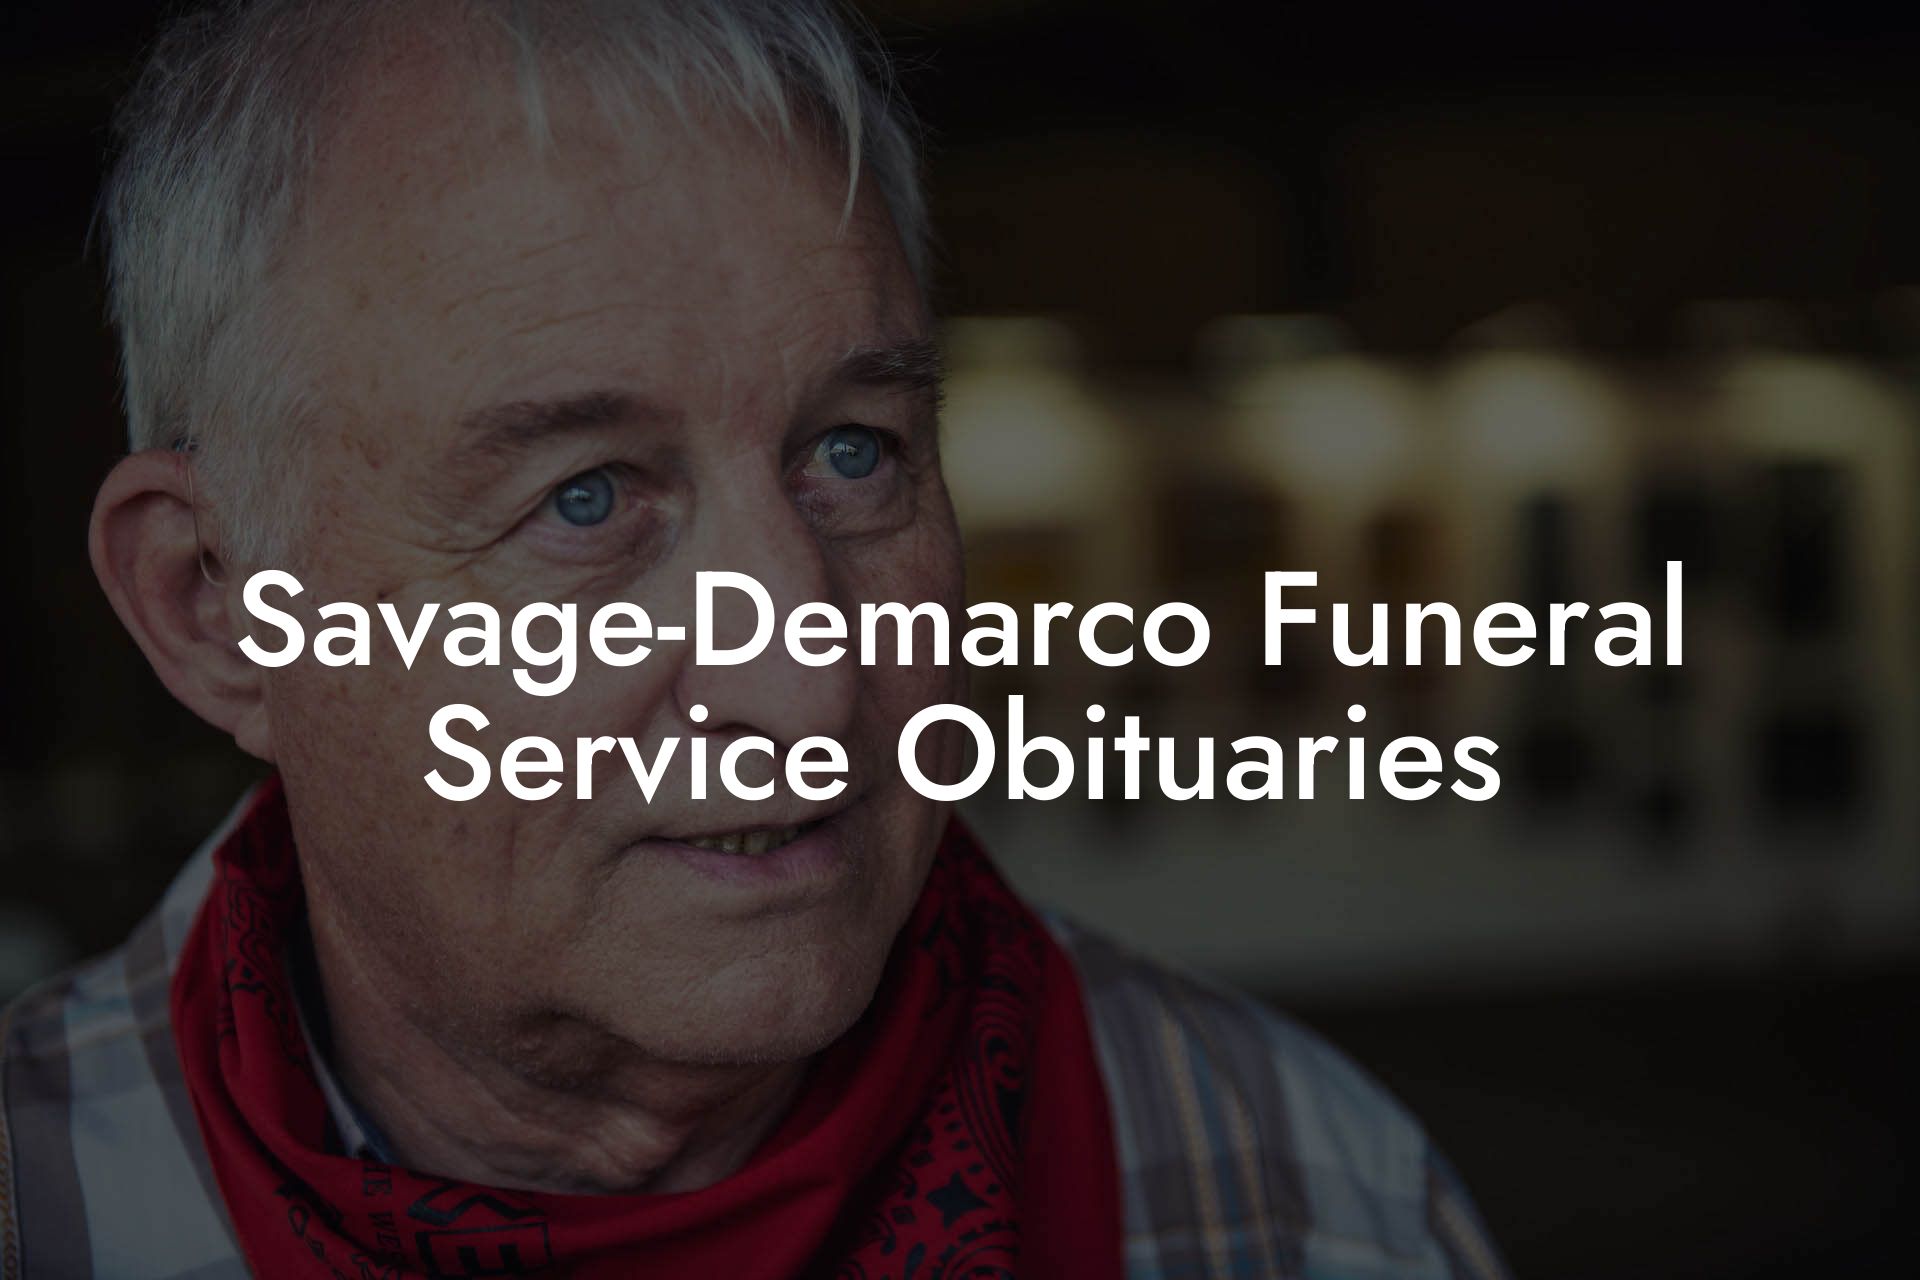 Savage-Demarco Funeral Service Obituaries